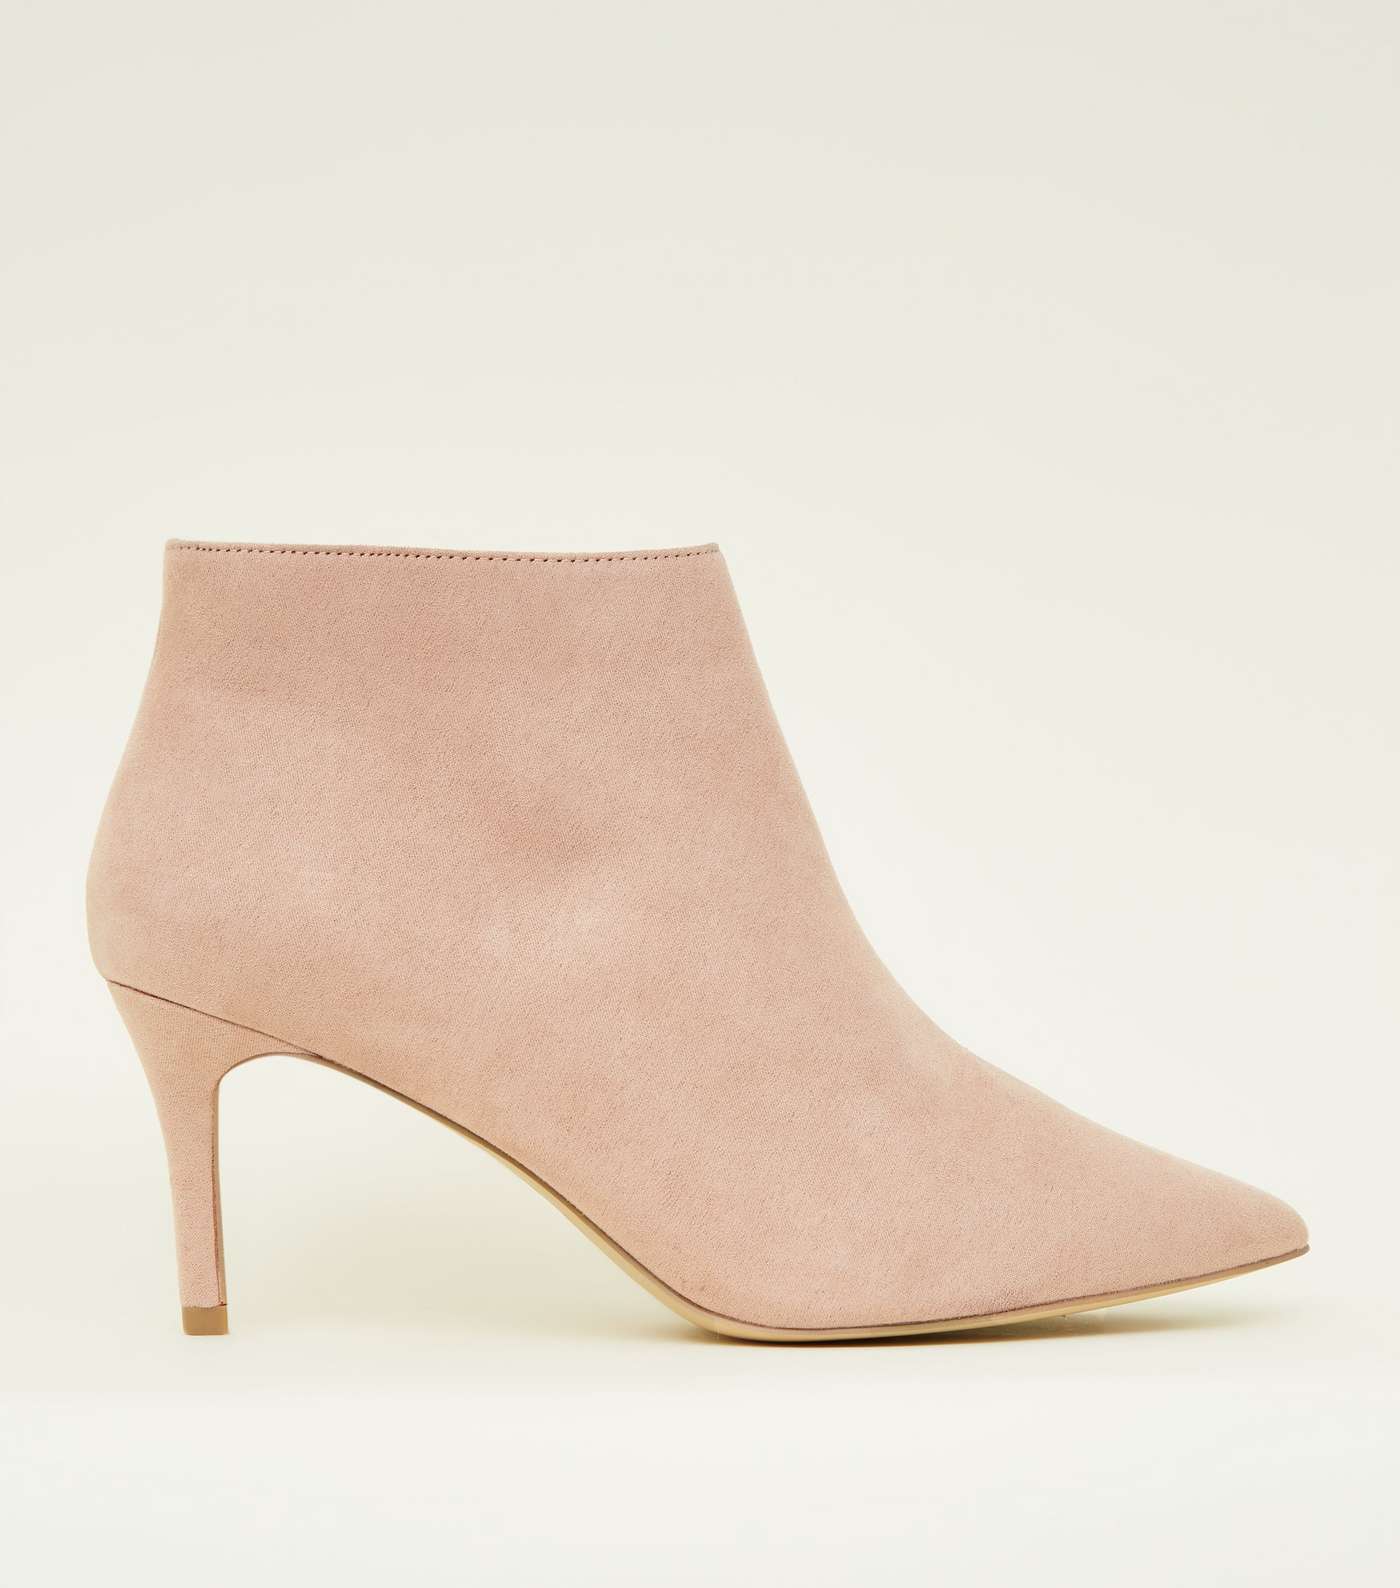 Wide Fit Nude Suedette Stiletto Heel Ankle Boots